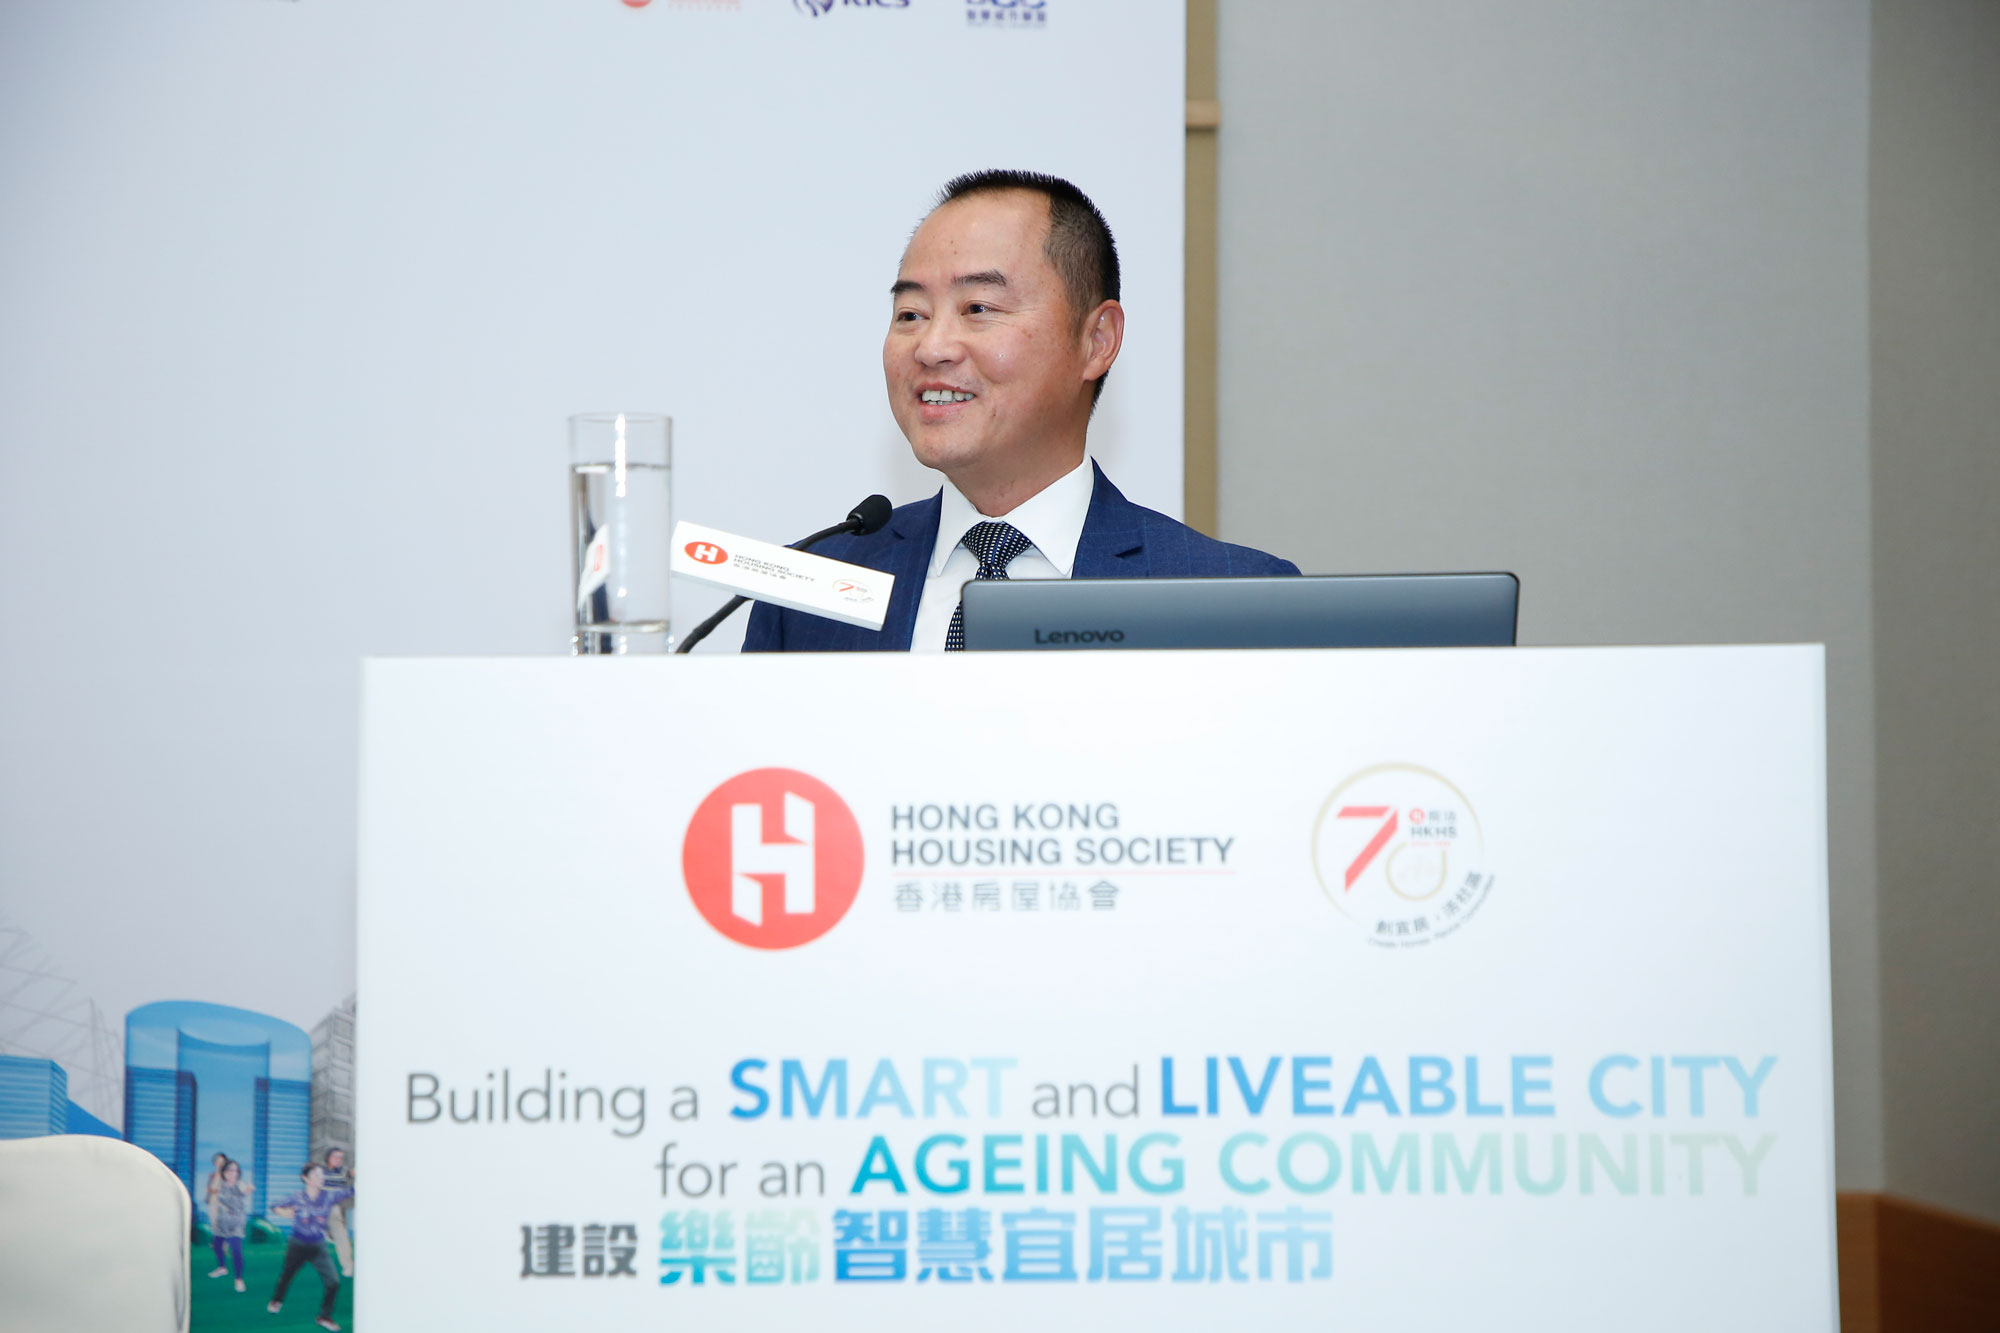 Mr. Tony Wong, Assistant Government Chief Information Officer (Industry Development), delivers Speech at the “HKHS International Housing Conference”.